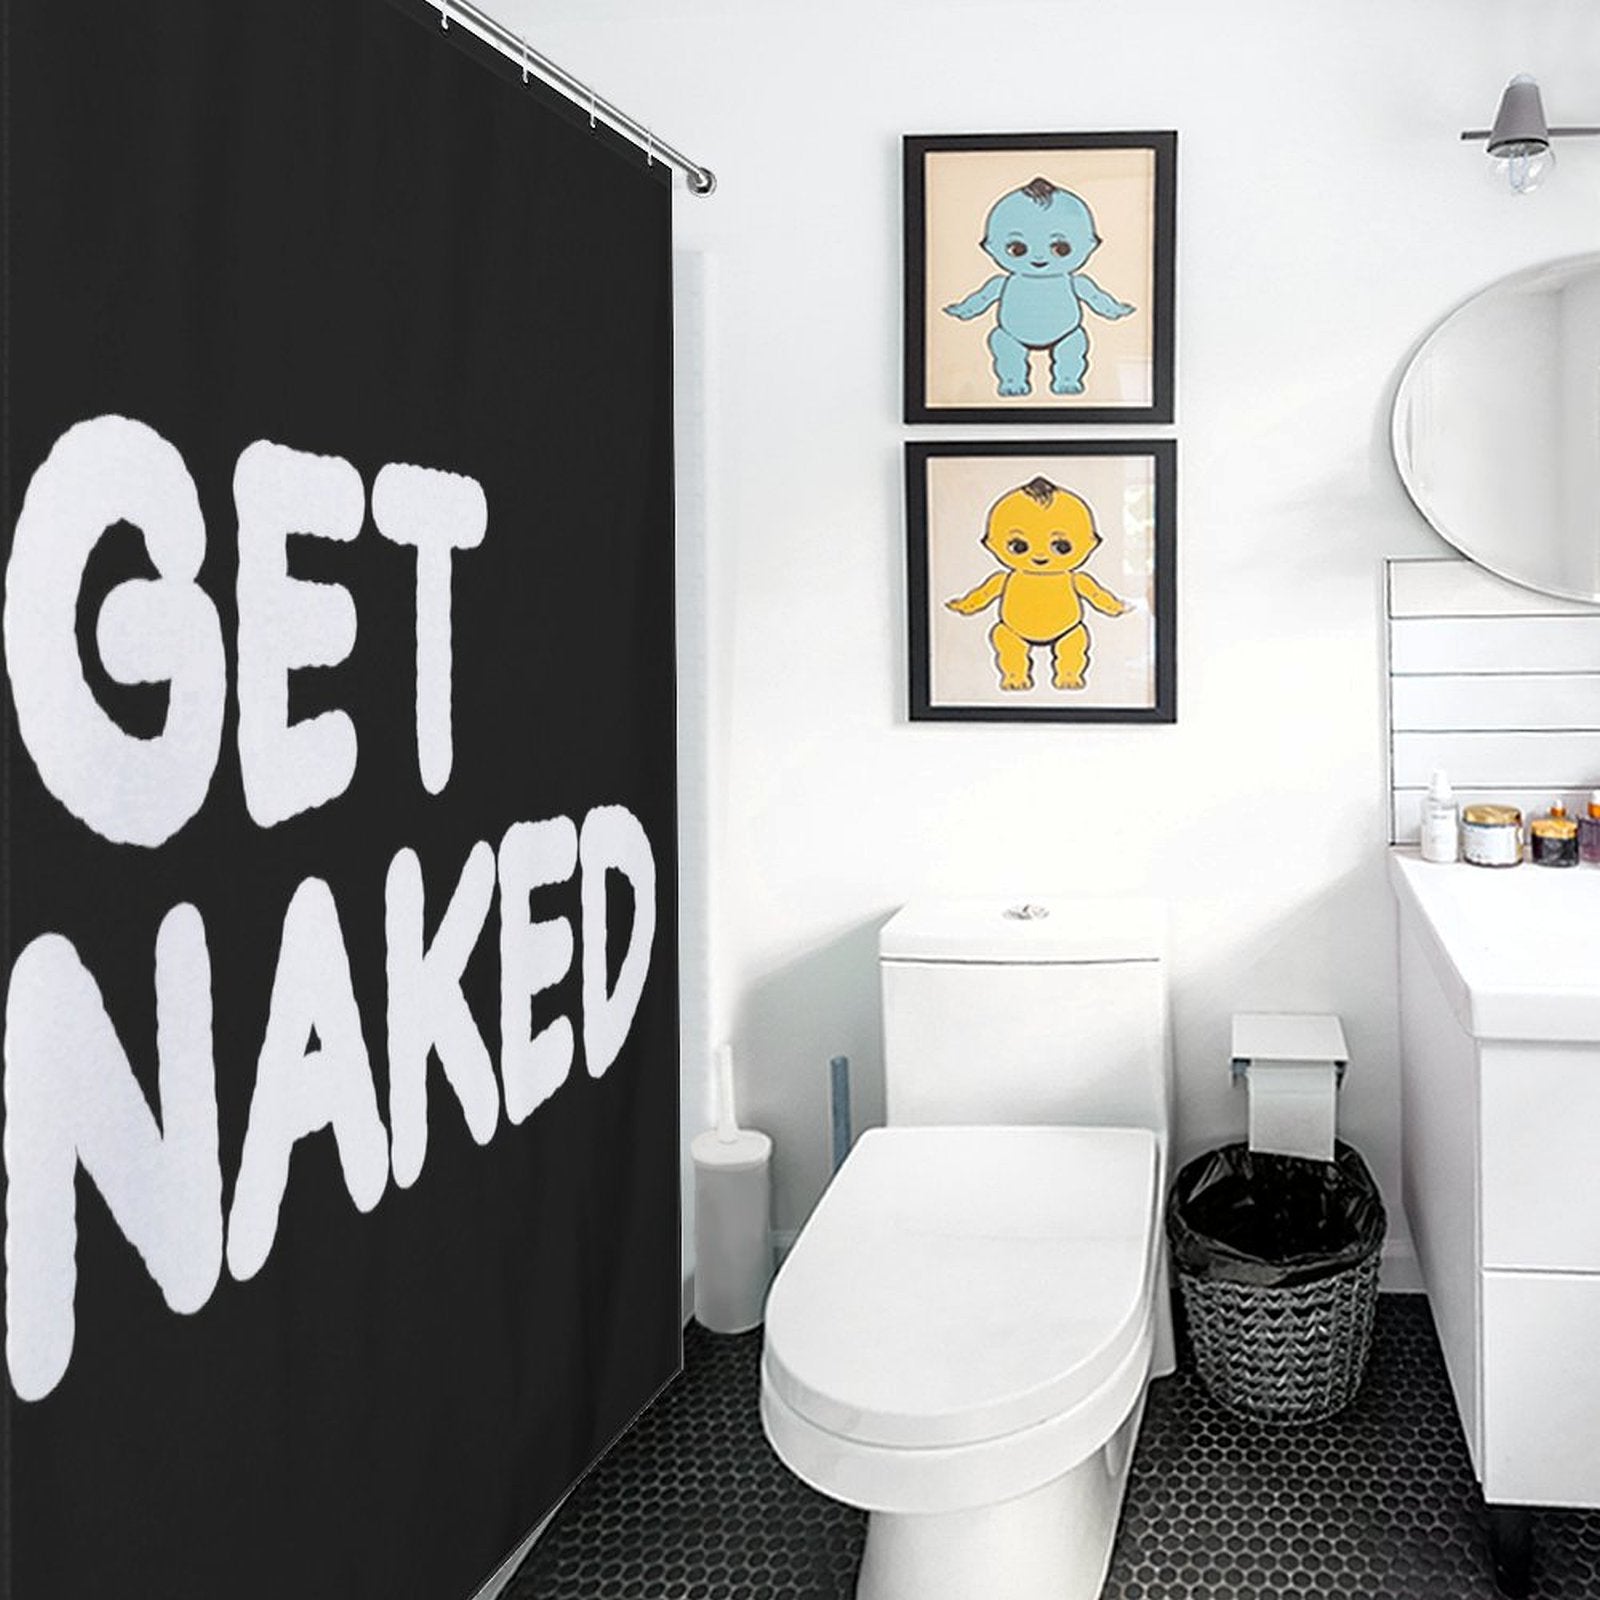 Modern bathroom with a Funny Black and White Letters Get Naked Shower Curtain-Cottoncat by Cotton Cat. The room includes a toilet, a countertop with a round mirror, and two framed prints of cartoon characters on the wall.